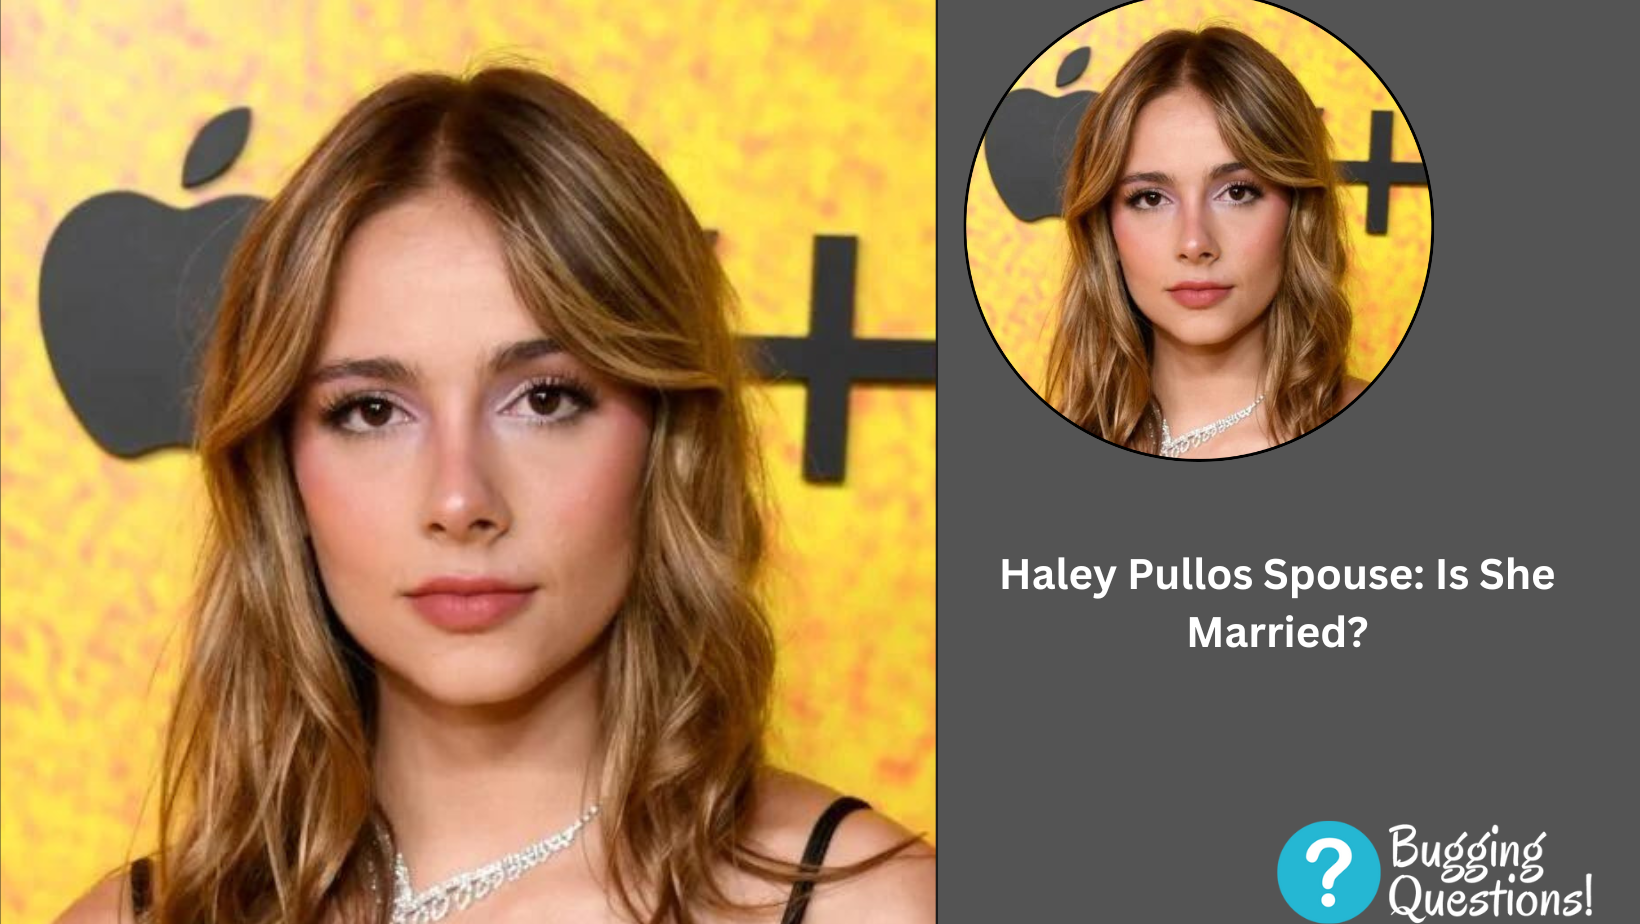 Haley Pullos Spouse: Is She Married?